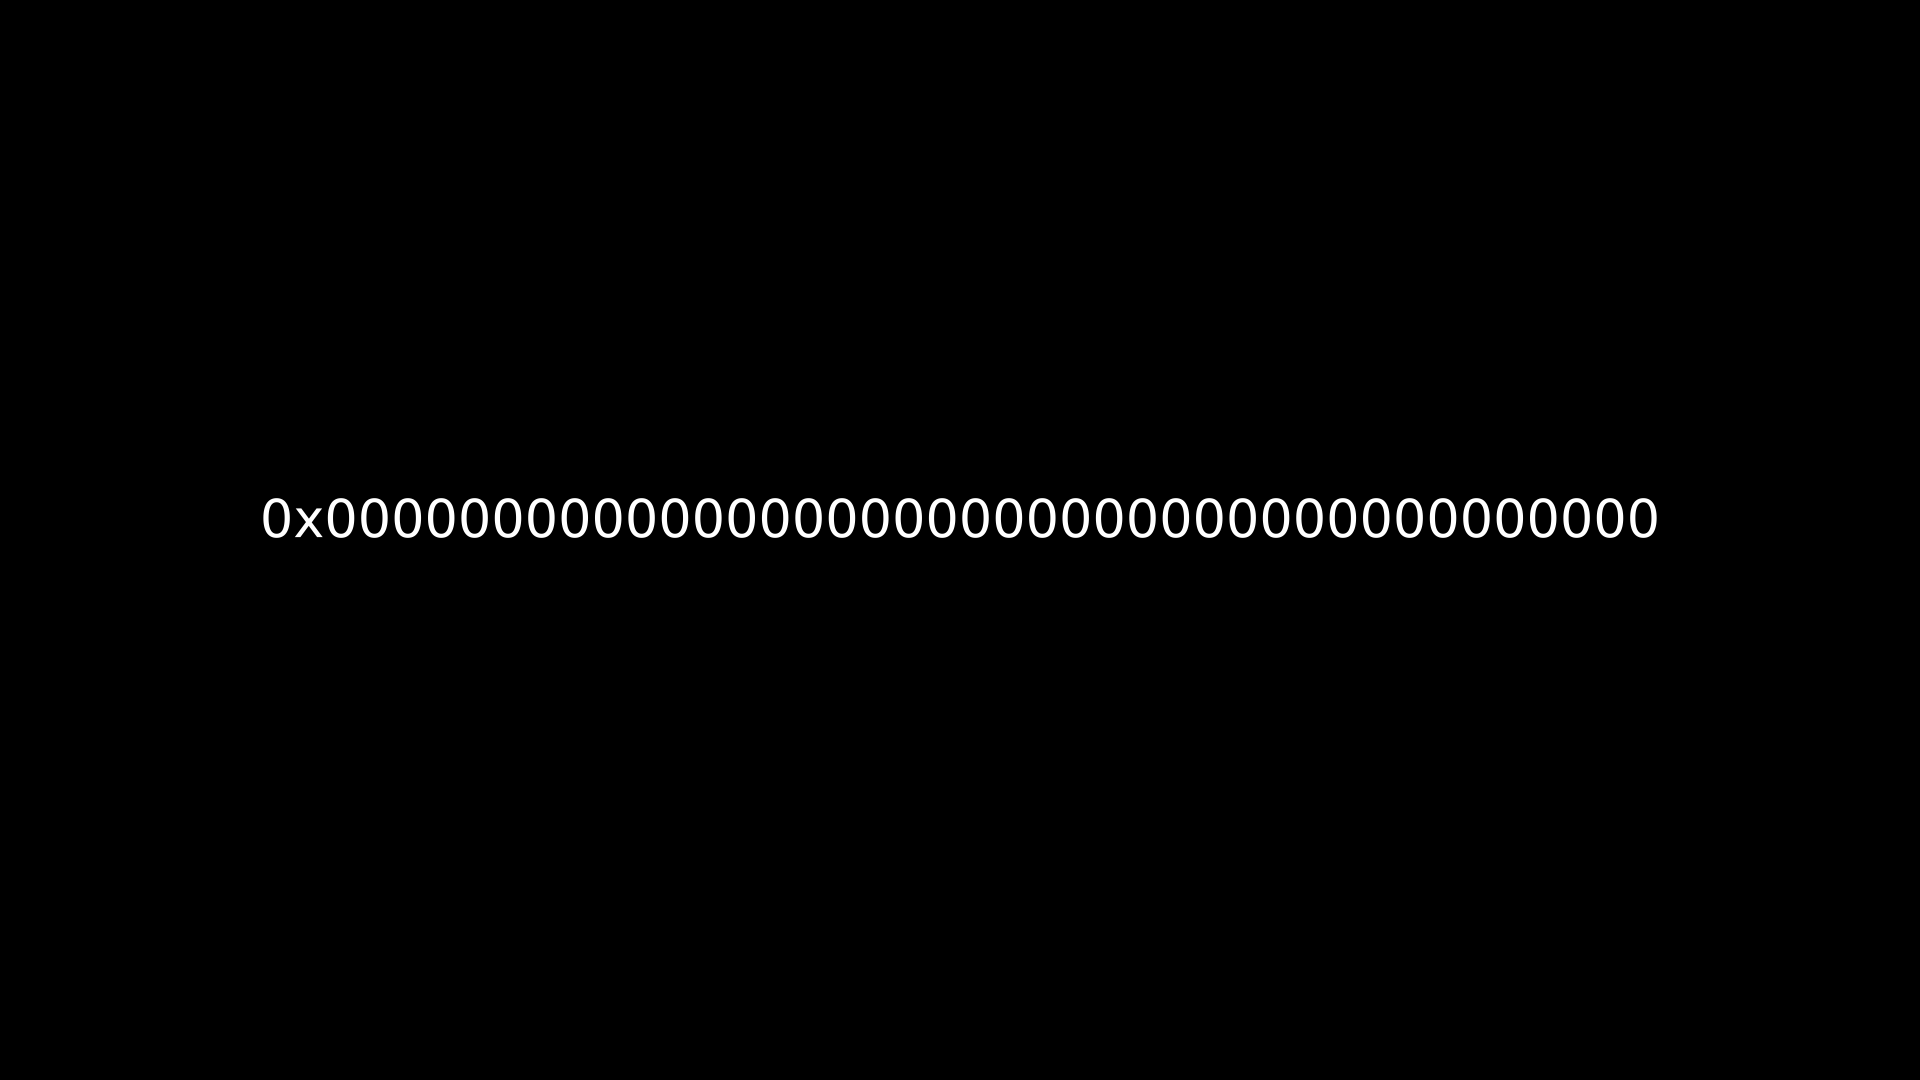 The Ethereum null address, which consists of a string of zeroes with one X in the second position, written in white on a black background